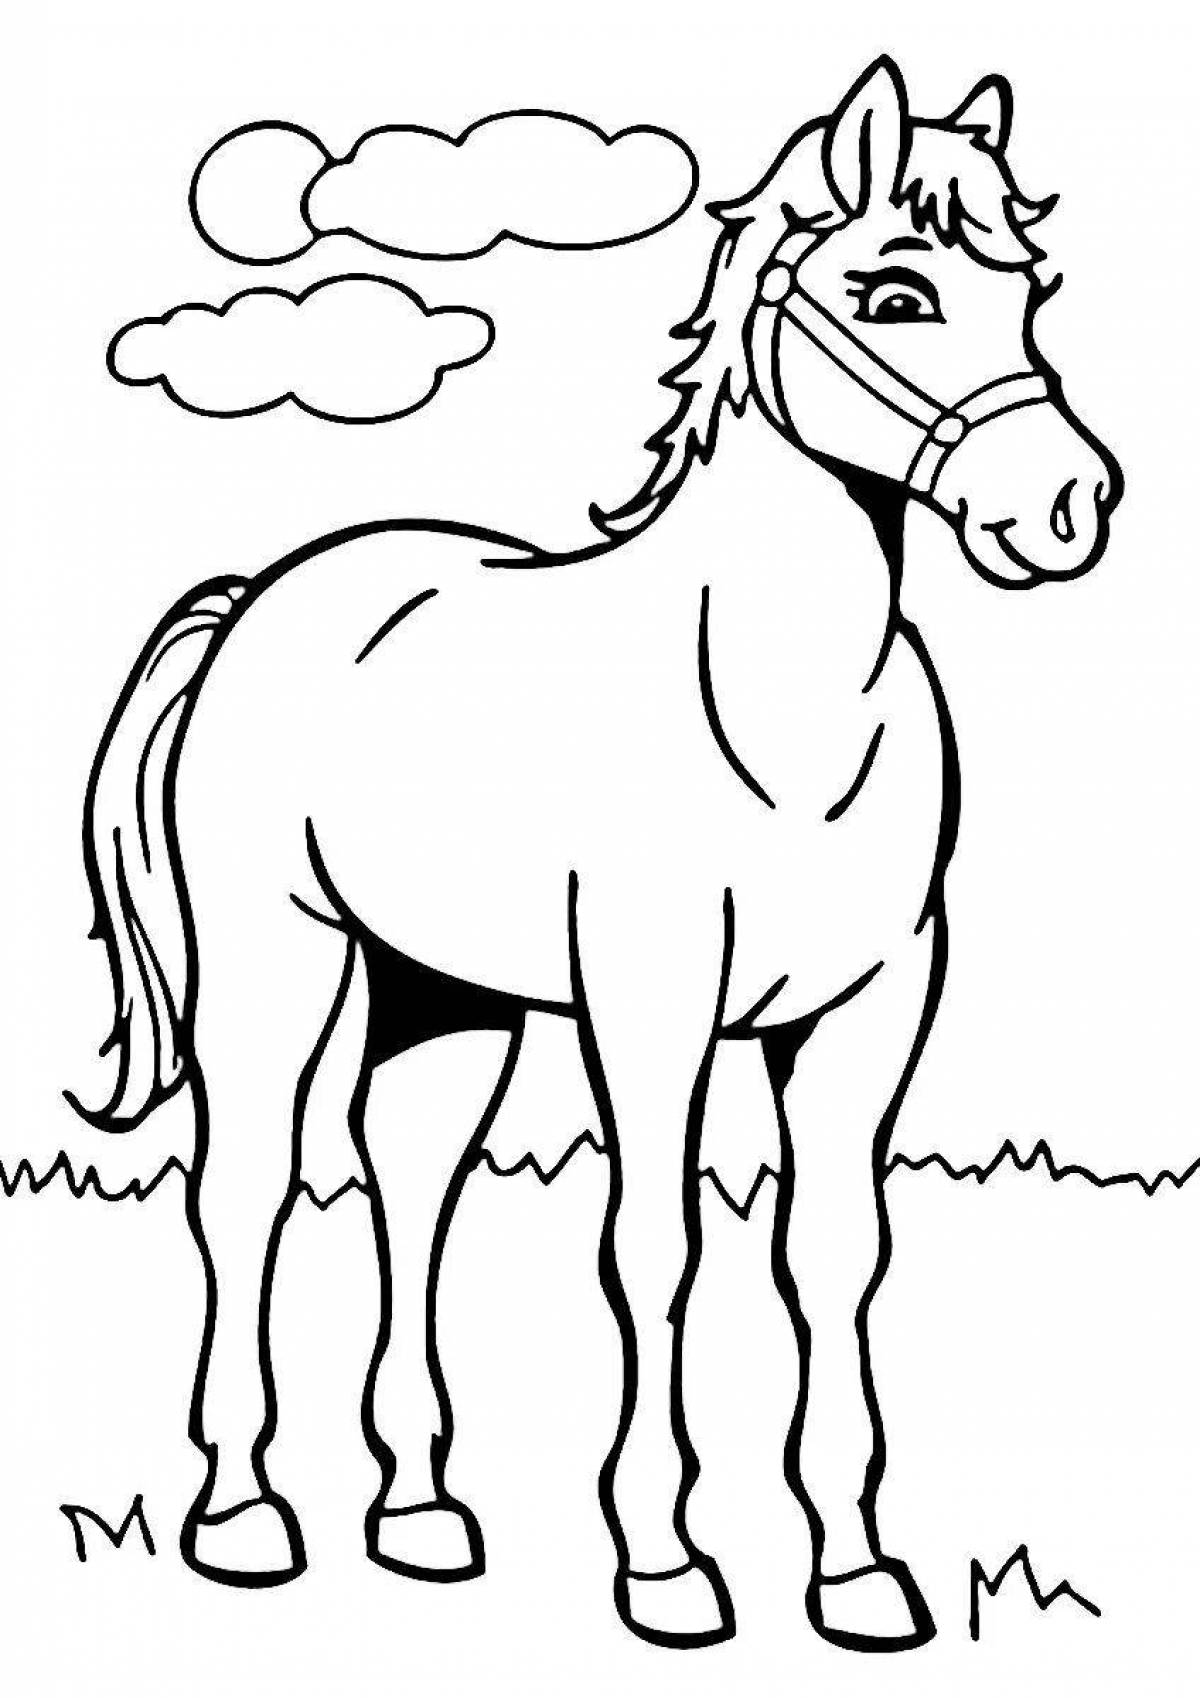 Great horse coloring book for 4-5 year olds